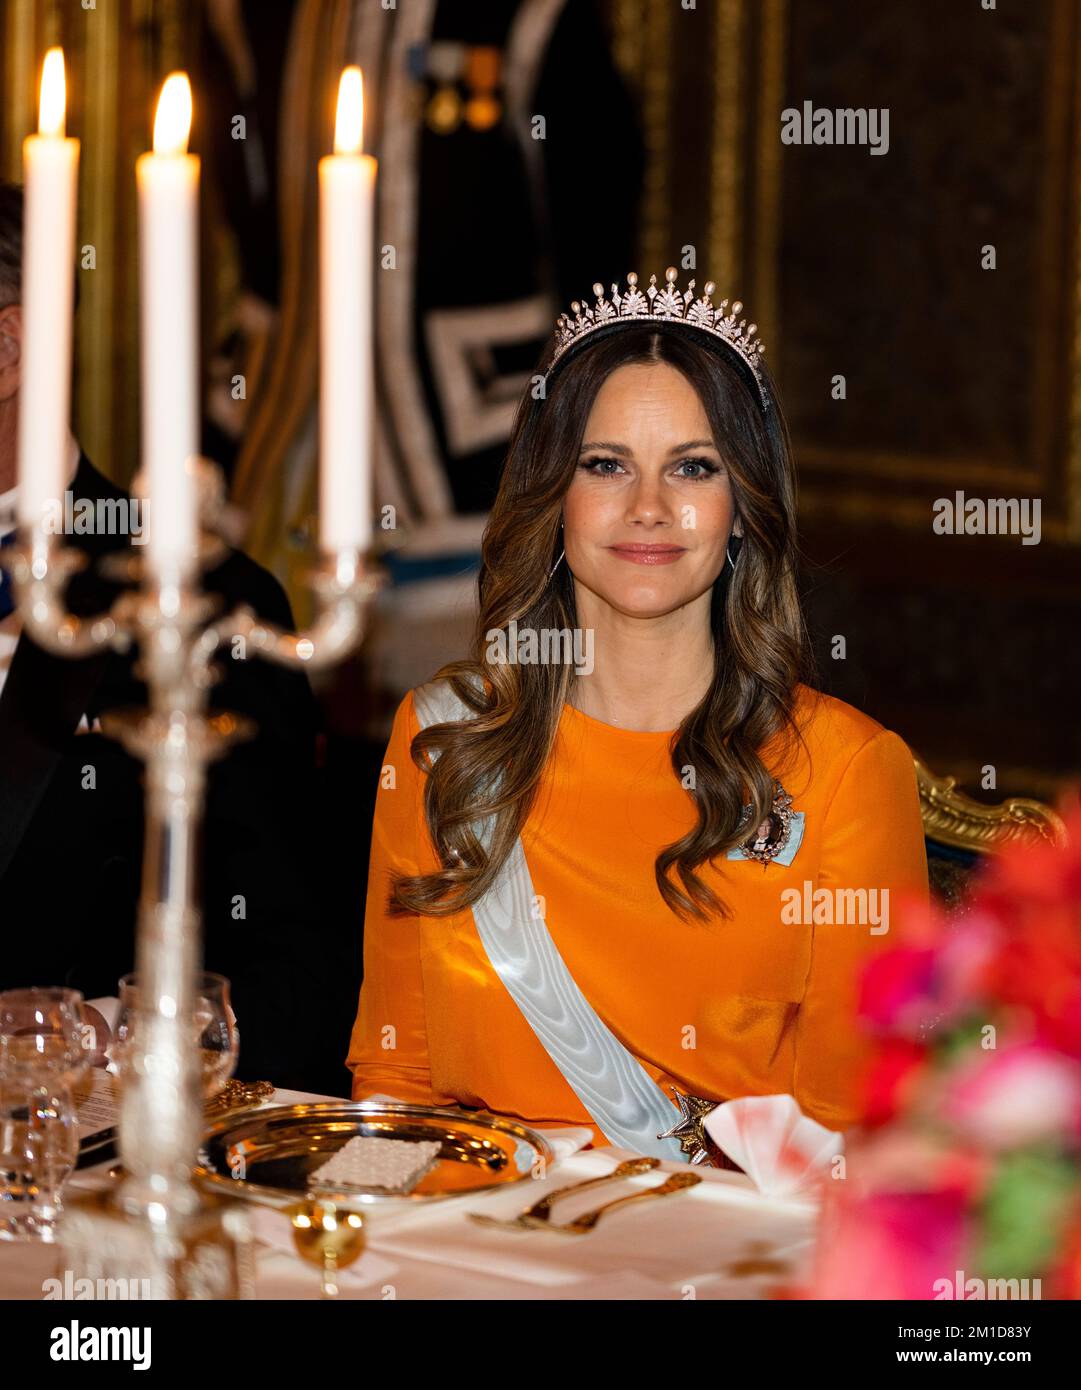 Princess Sofia attends the King's dinner for the Nobel laureates at the Royal Palace in Stockholm, Sweden, 11 December 2022.  Photo: Pontus Lundahl / TT / 10050 Stock Photo